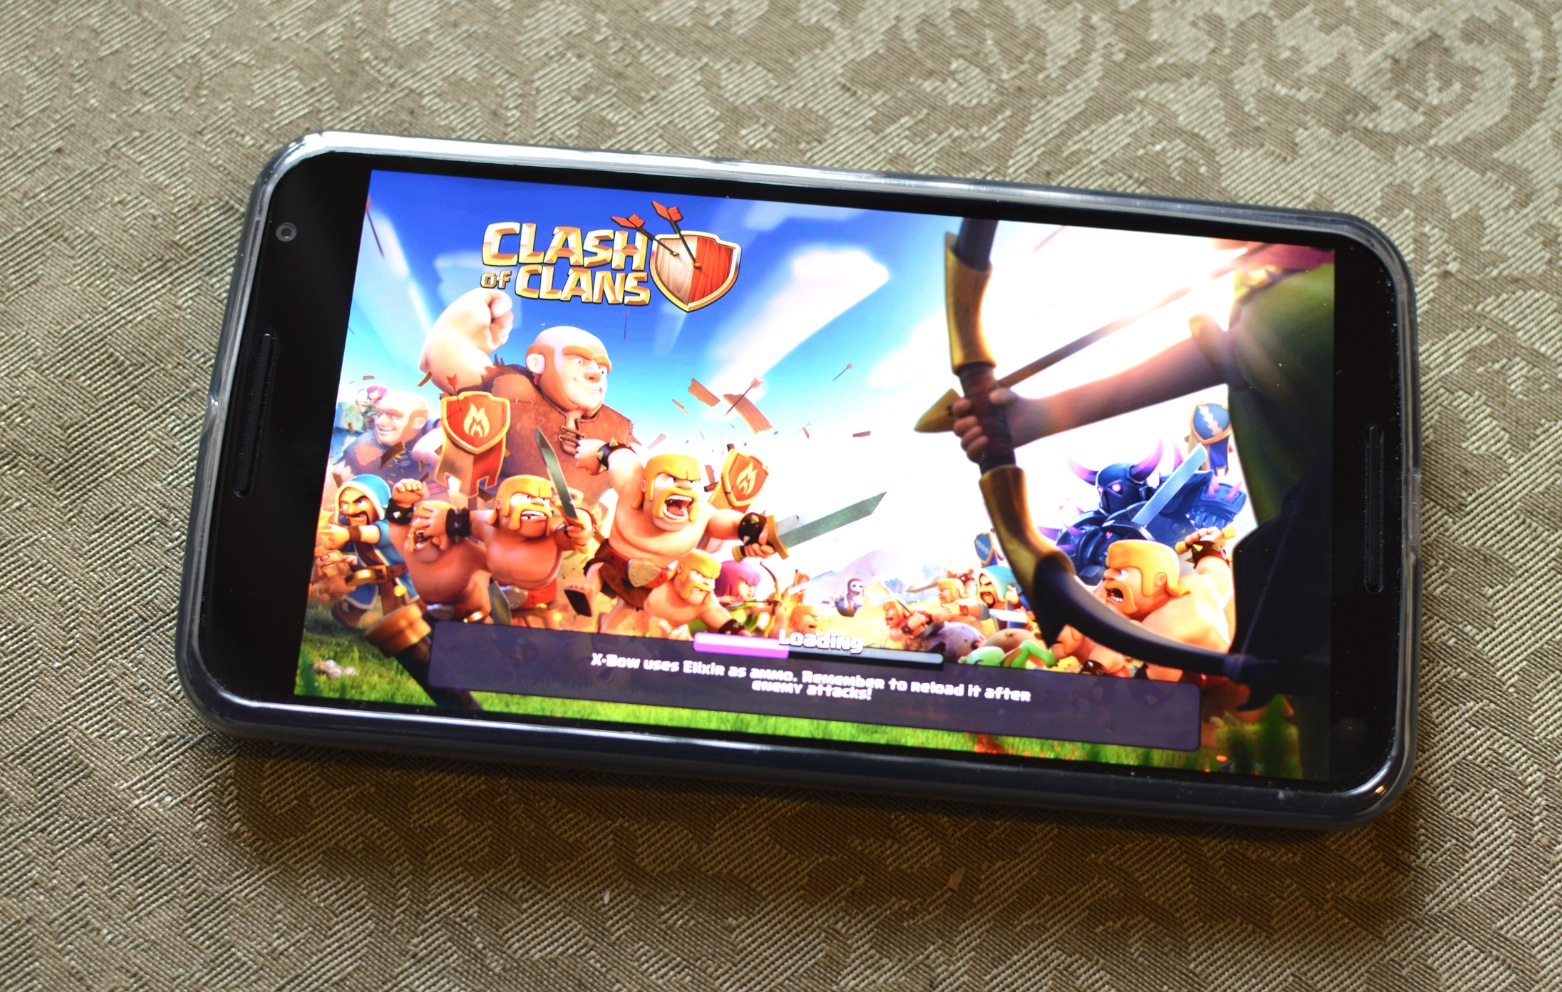 How to Transfer Clash of Clans to a New Phone